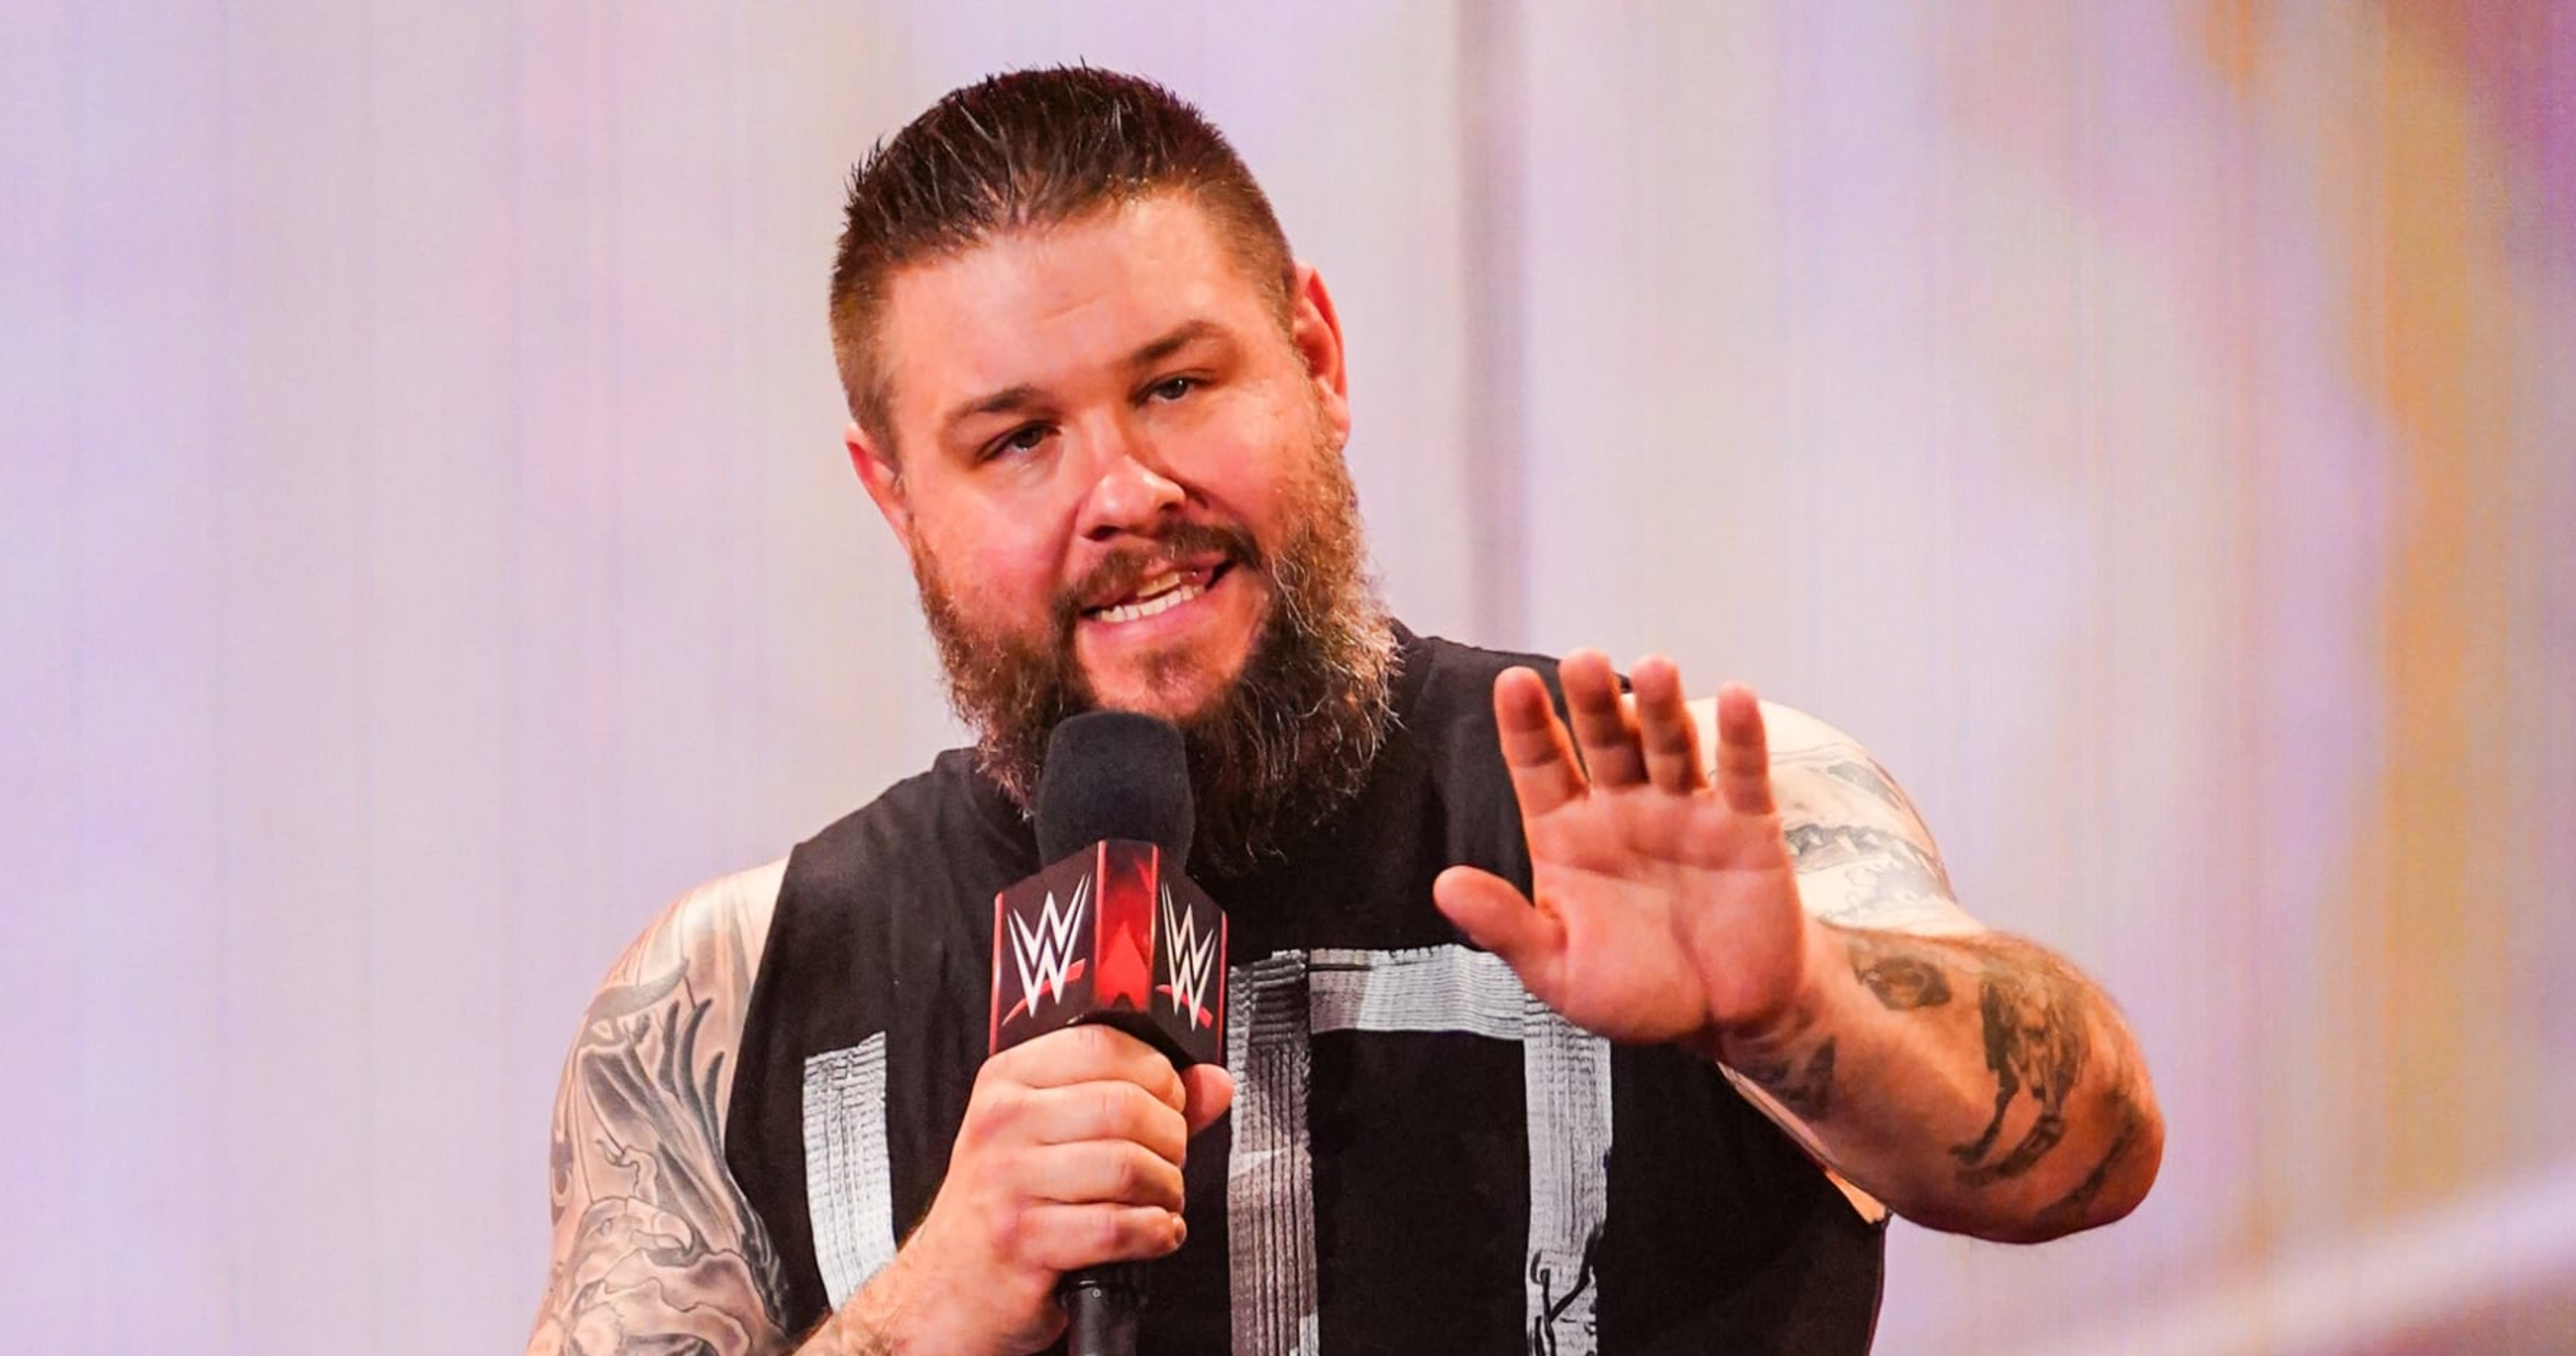 Backstage Wwe And Aew Rumors Latest On Kevin Owens William Regal And More News Scores 